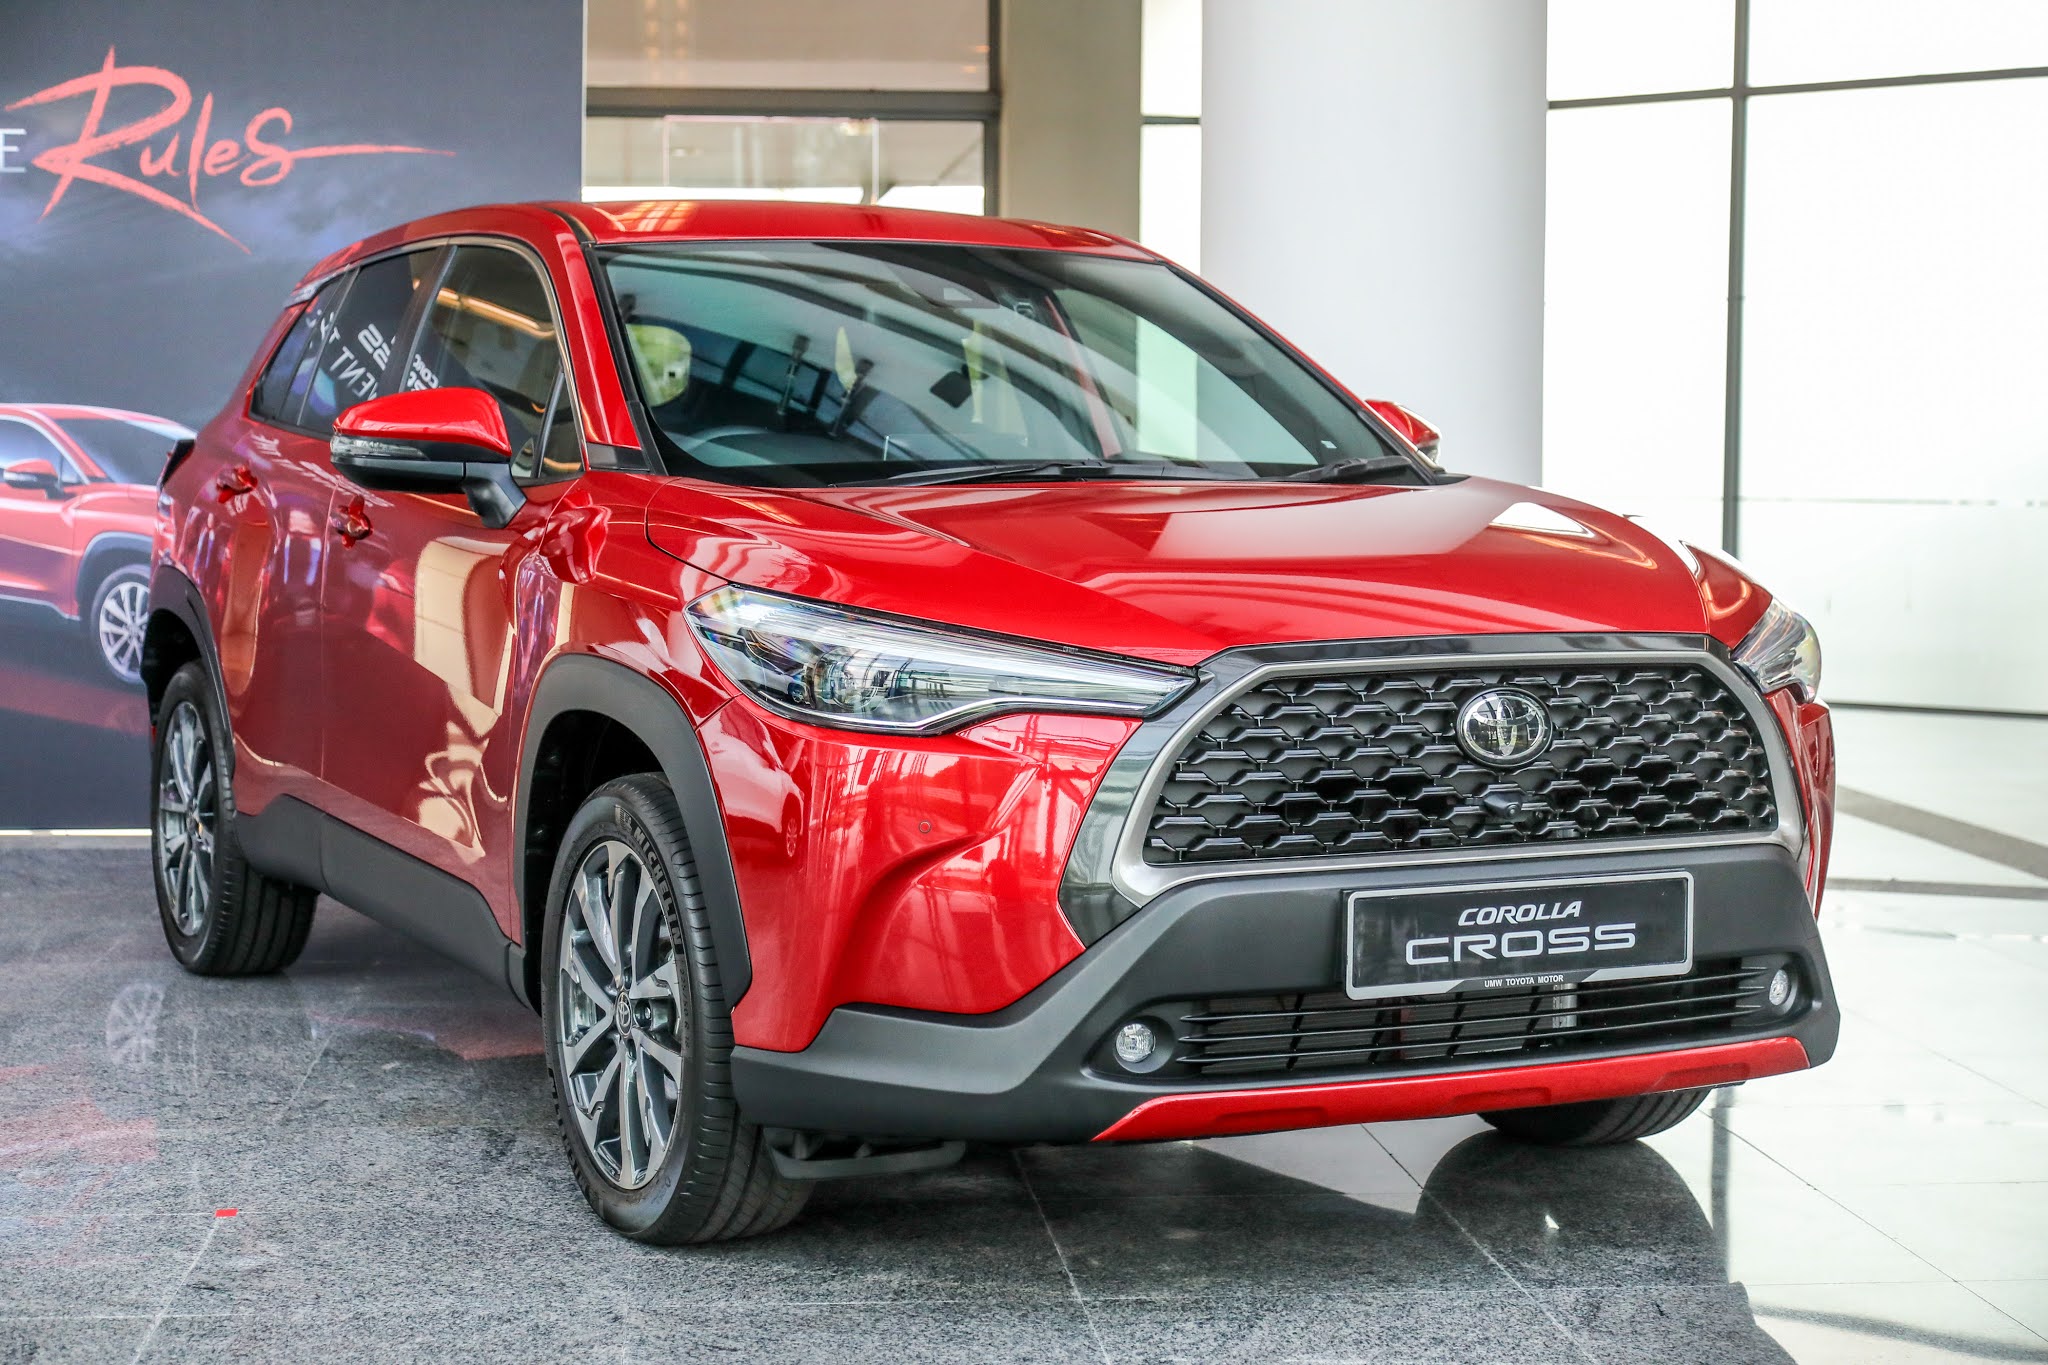 Motoring-Malaysia: 2021 Toyota Corolla Cross Has Been Launched - Priced